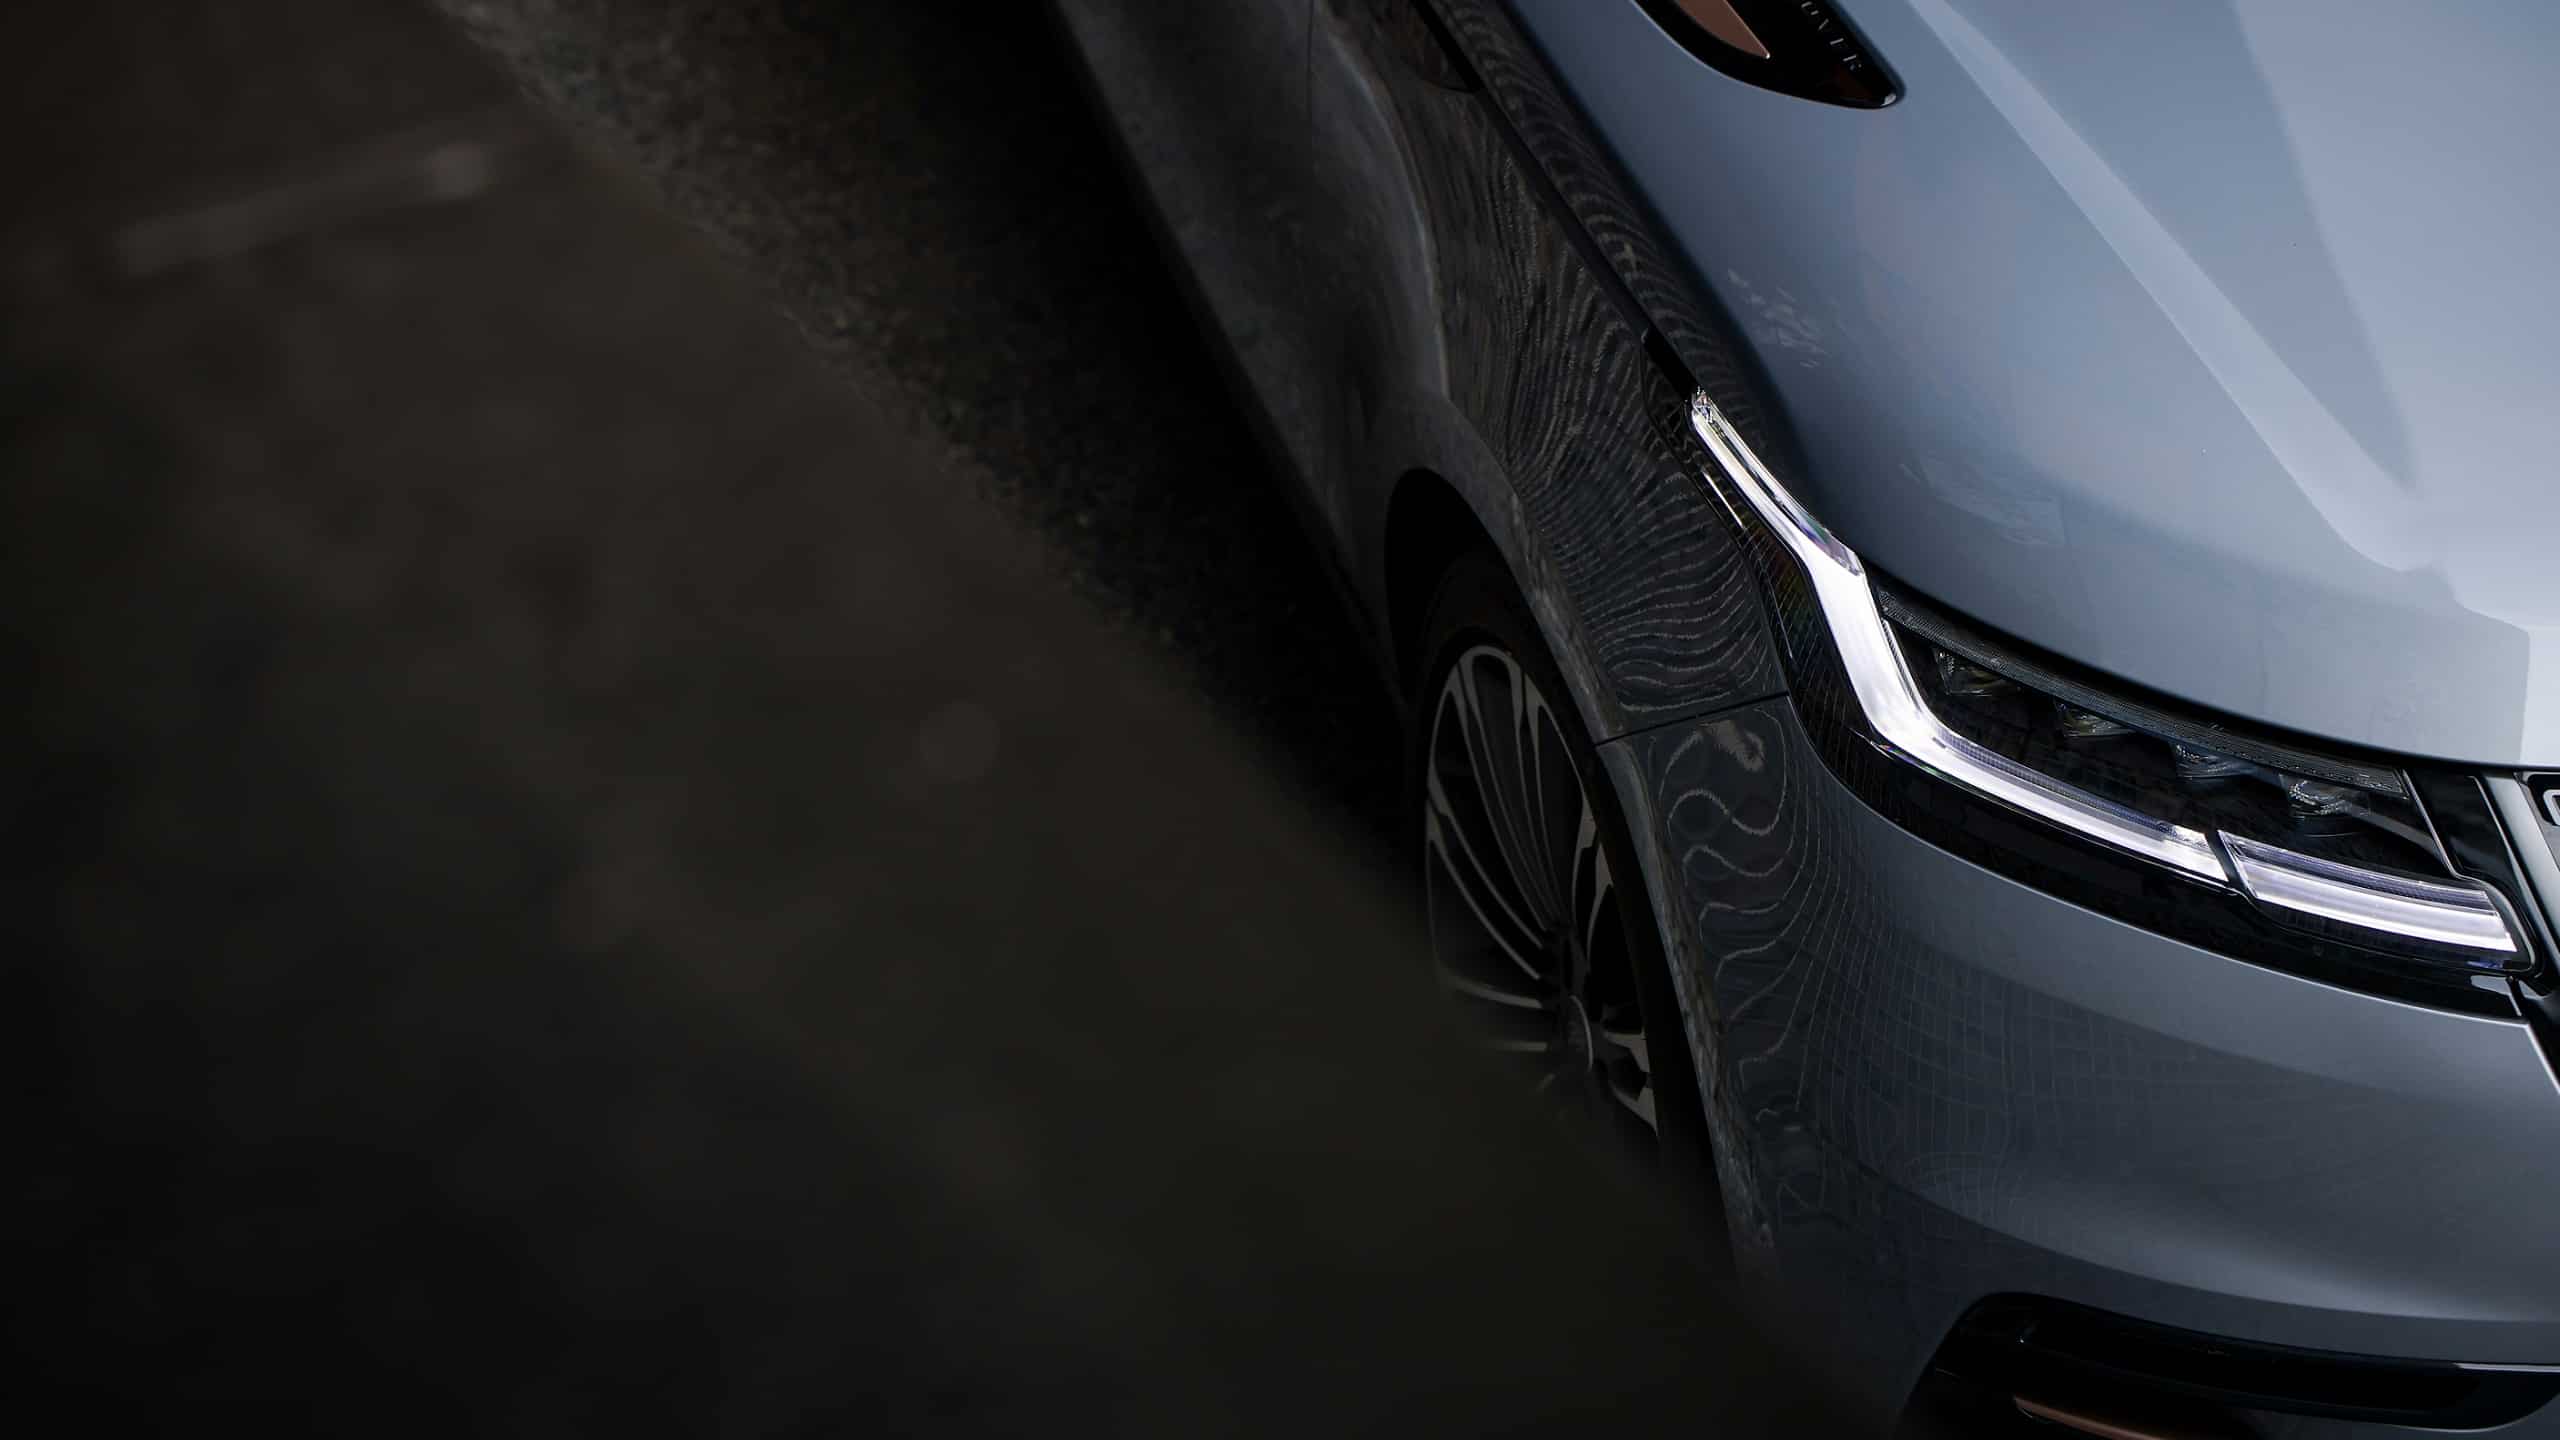  Range Rover Velar is equipped with pixel-style LED headlights with daytime running lights